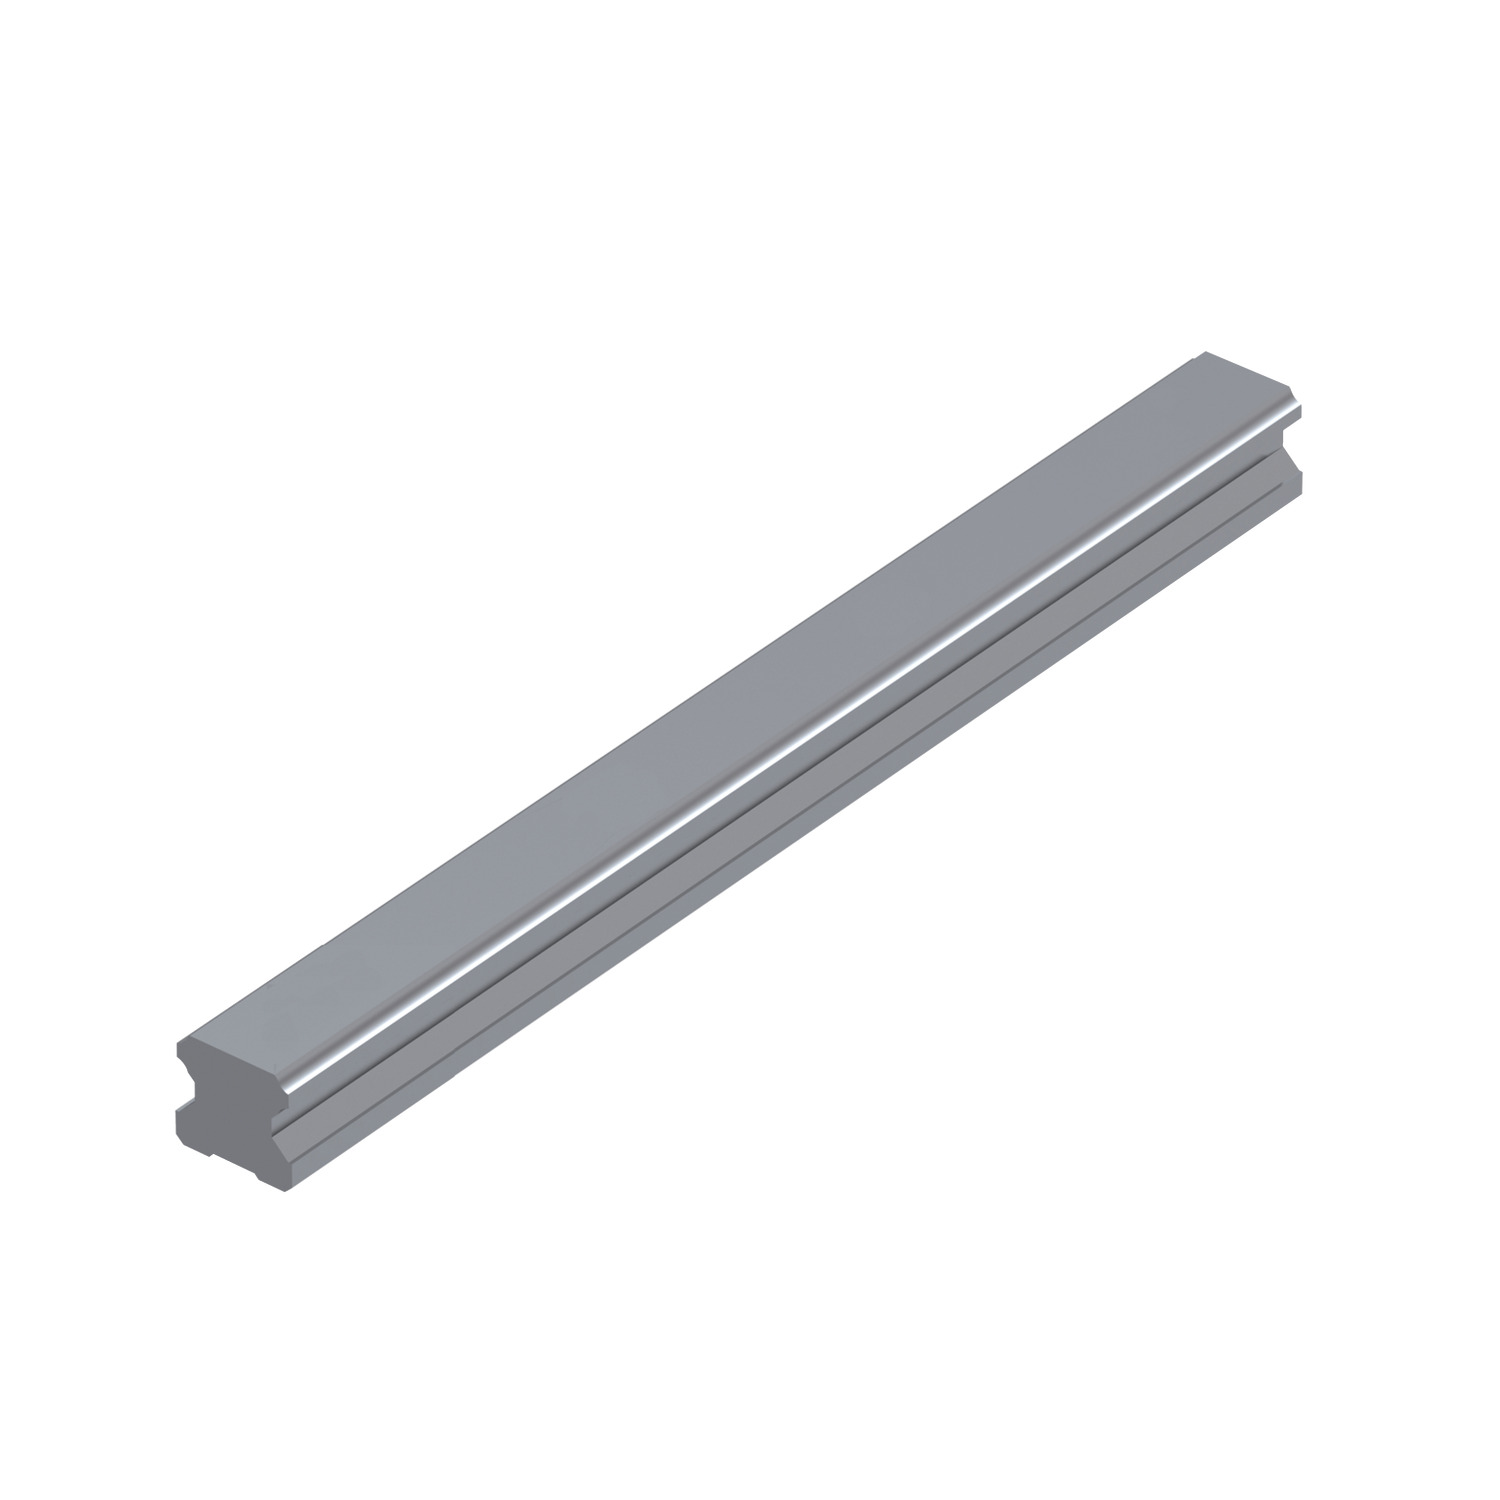 L1016.RF45-2880 Linear guide rail rear fixing 45mm 2880 Hardened and ground steel. EC:20169190 WG:05063055297844